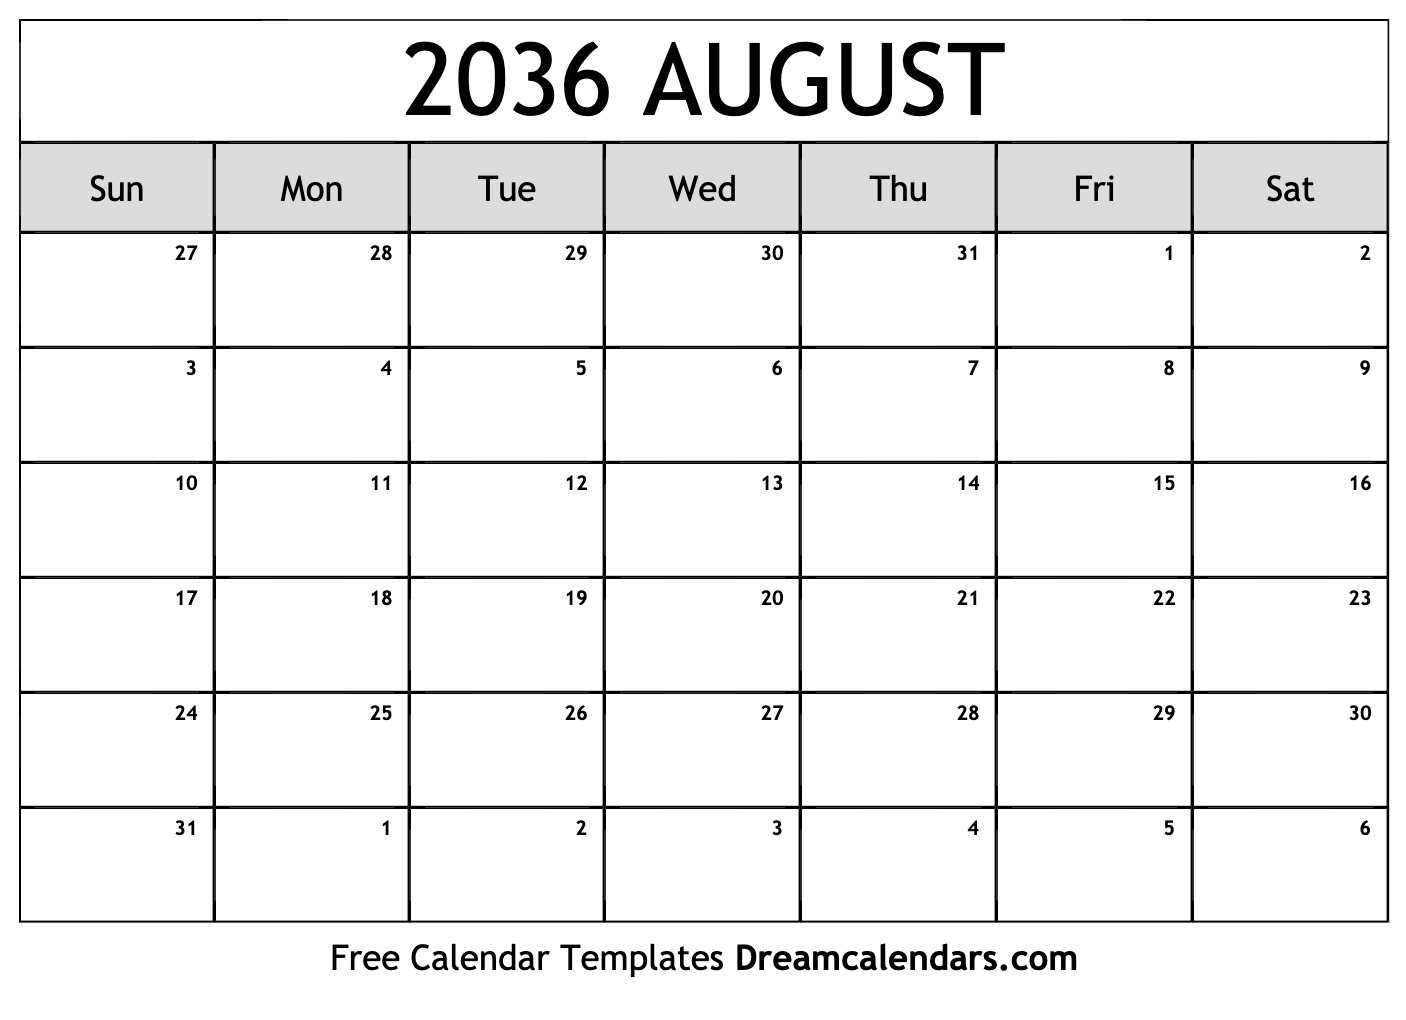 august-2036-calendar-free-blank-printable-with-holidays